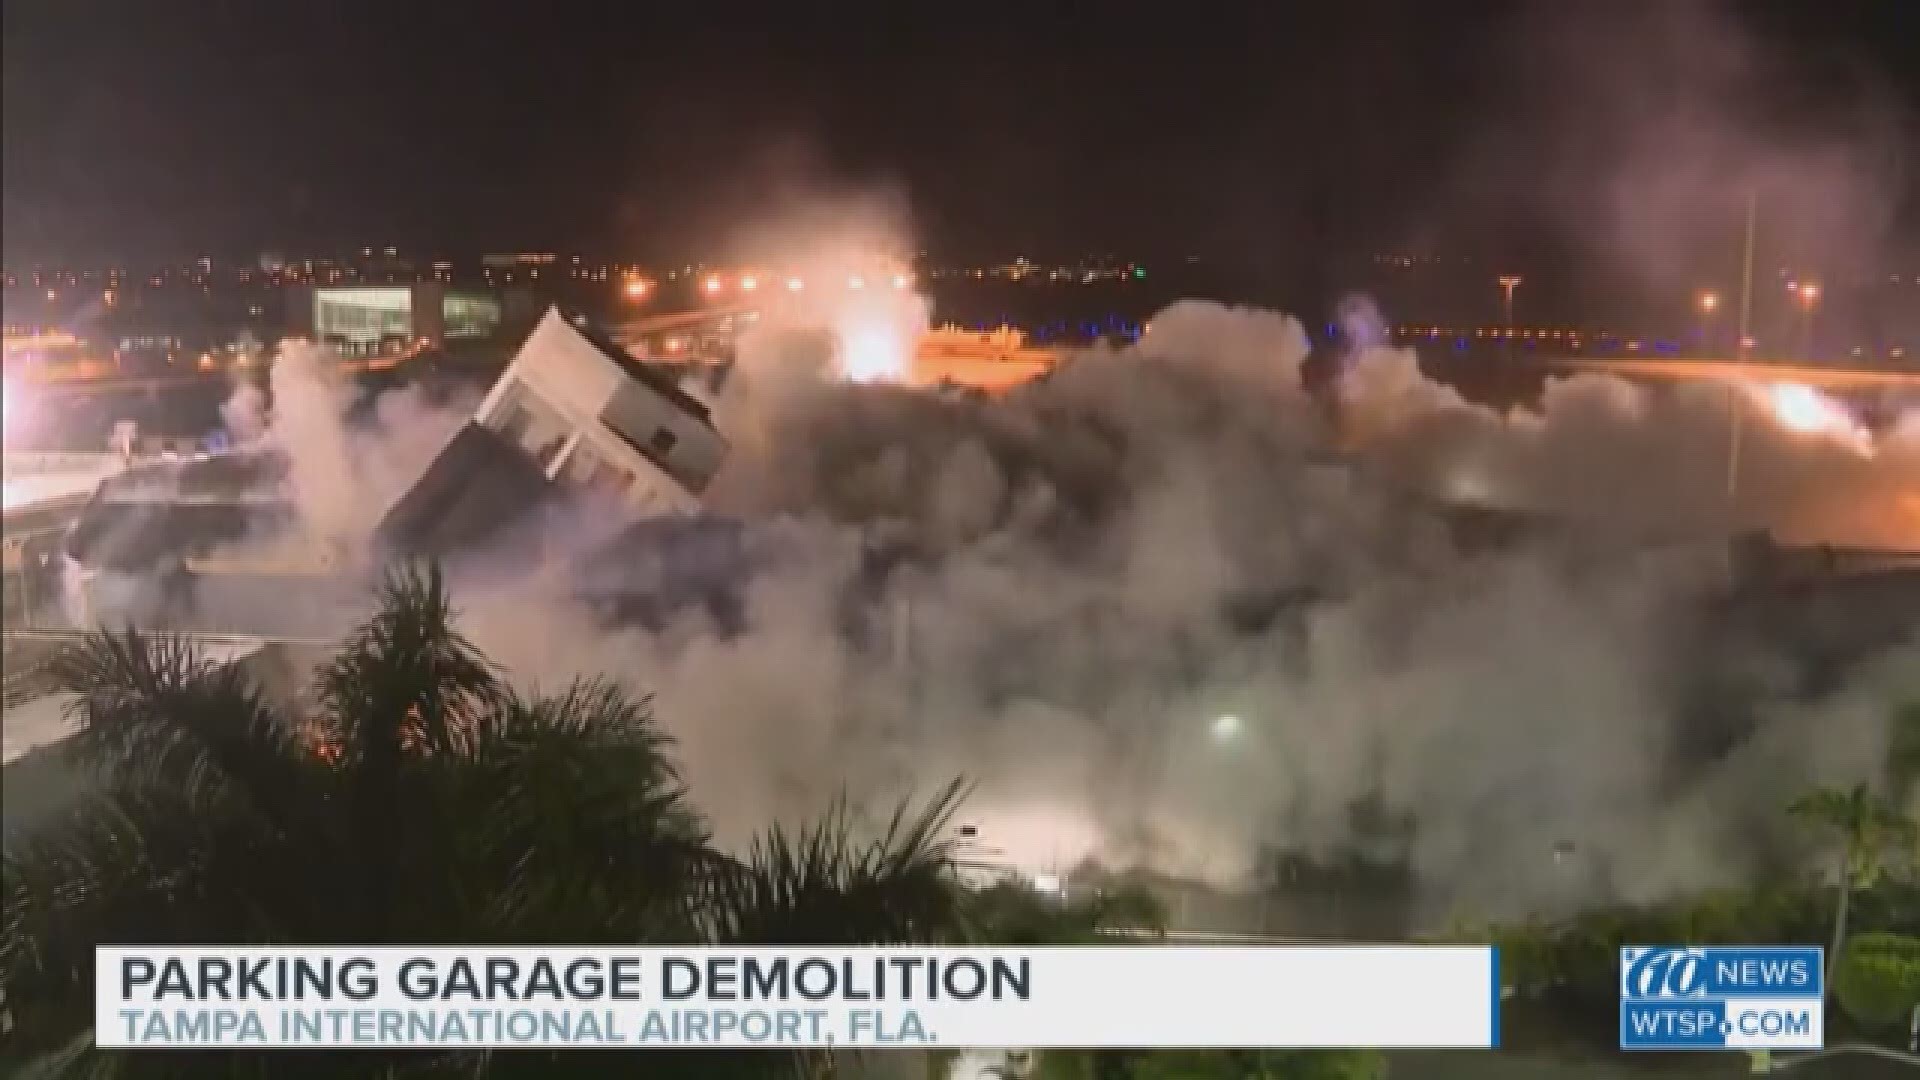 A large boom could be heard early Tuesday morning at Tampa International Airport, where crews demolished the old red side rental car garage around 2 a.m. This is what the implosion looked like from nearby.